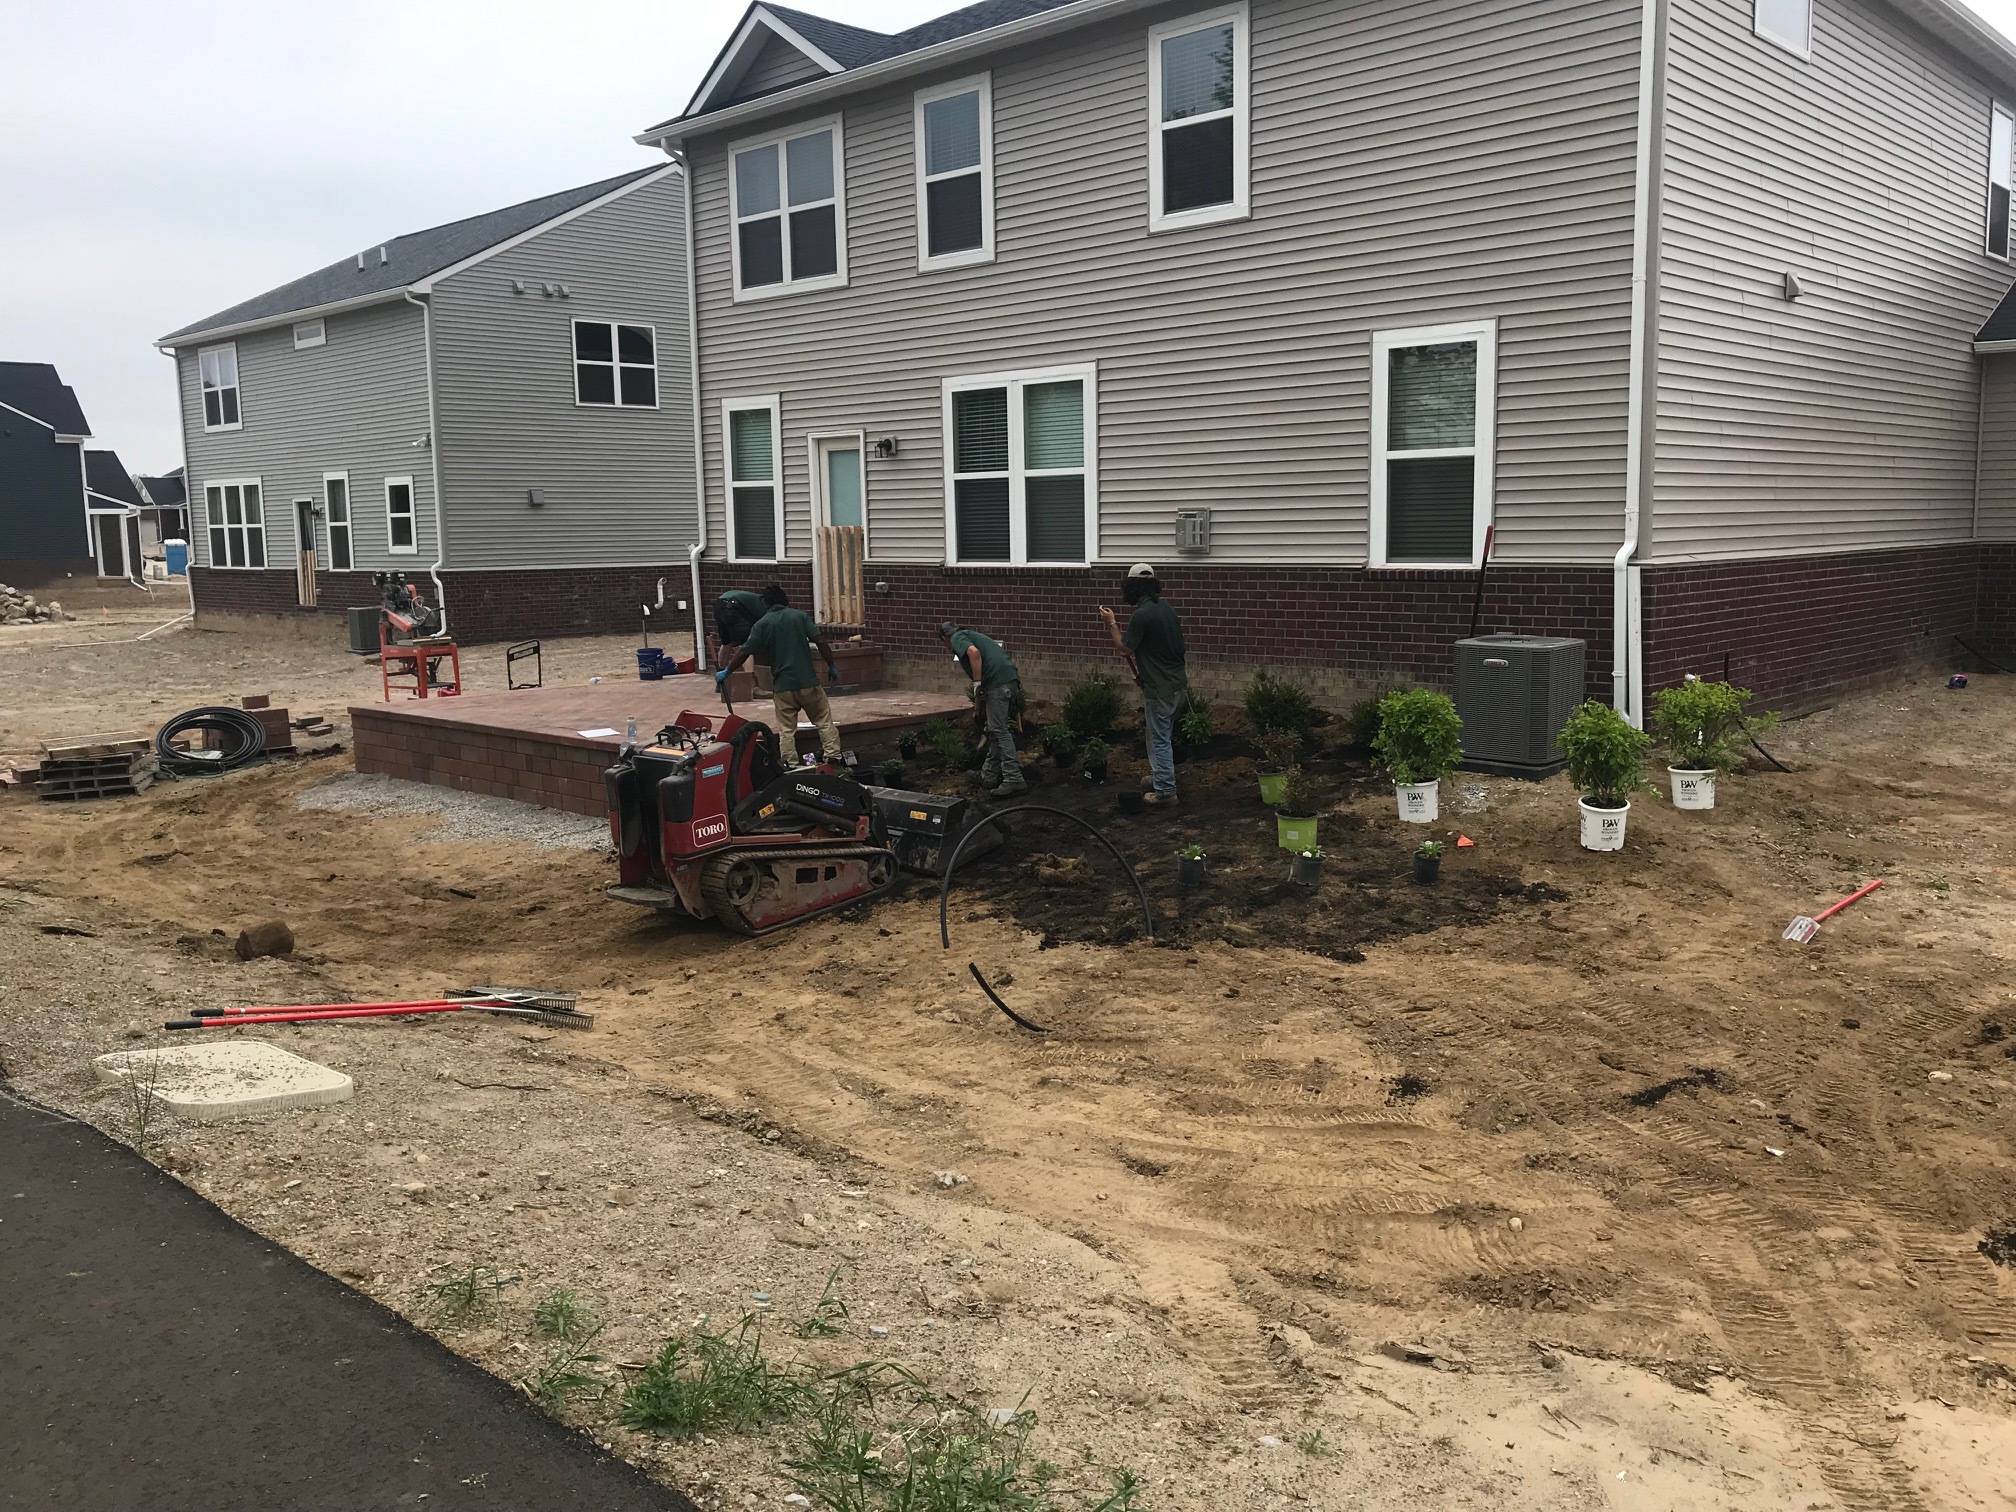 Newly constructed home with new landscape being planted around new backyard patio.